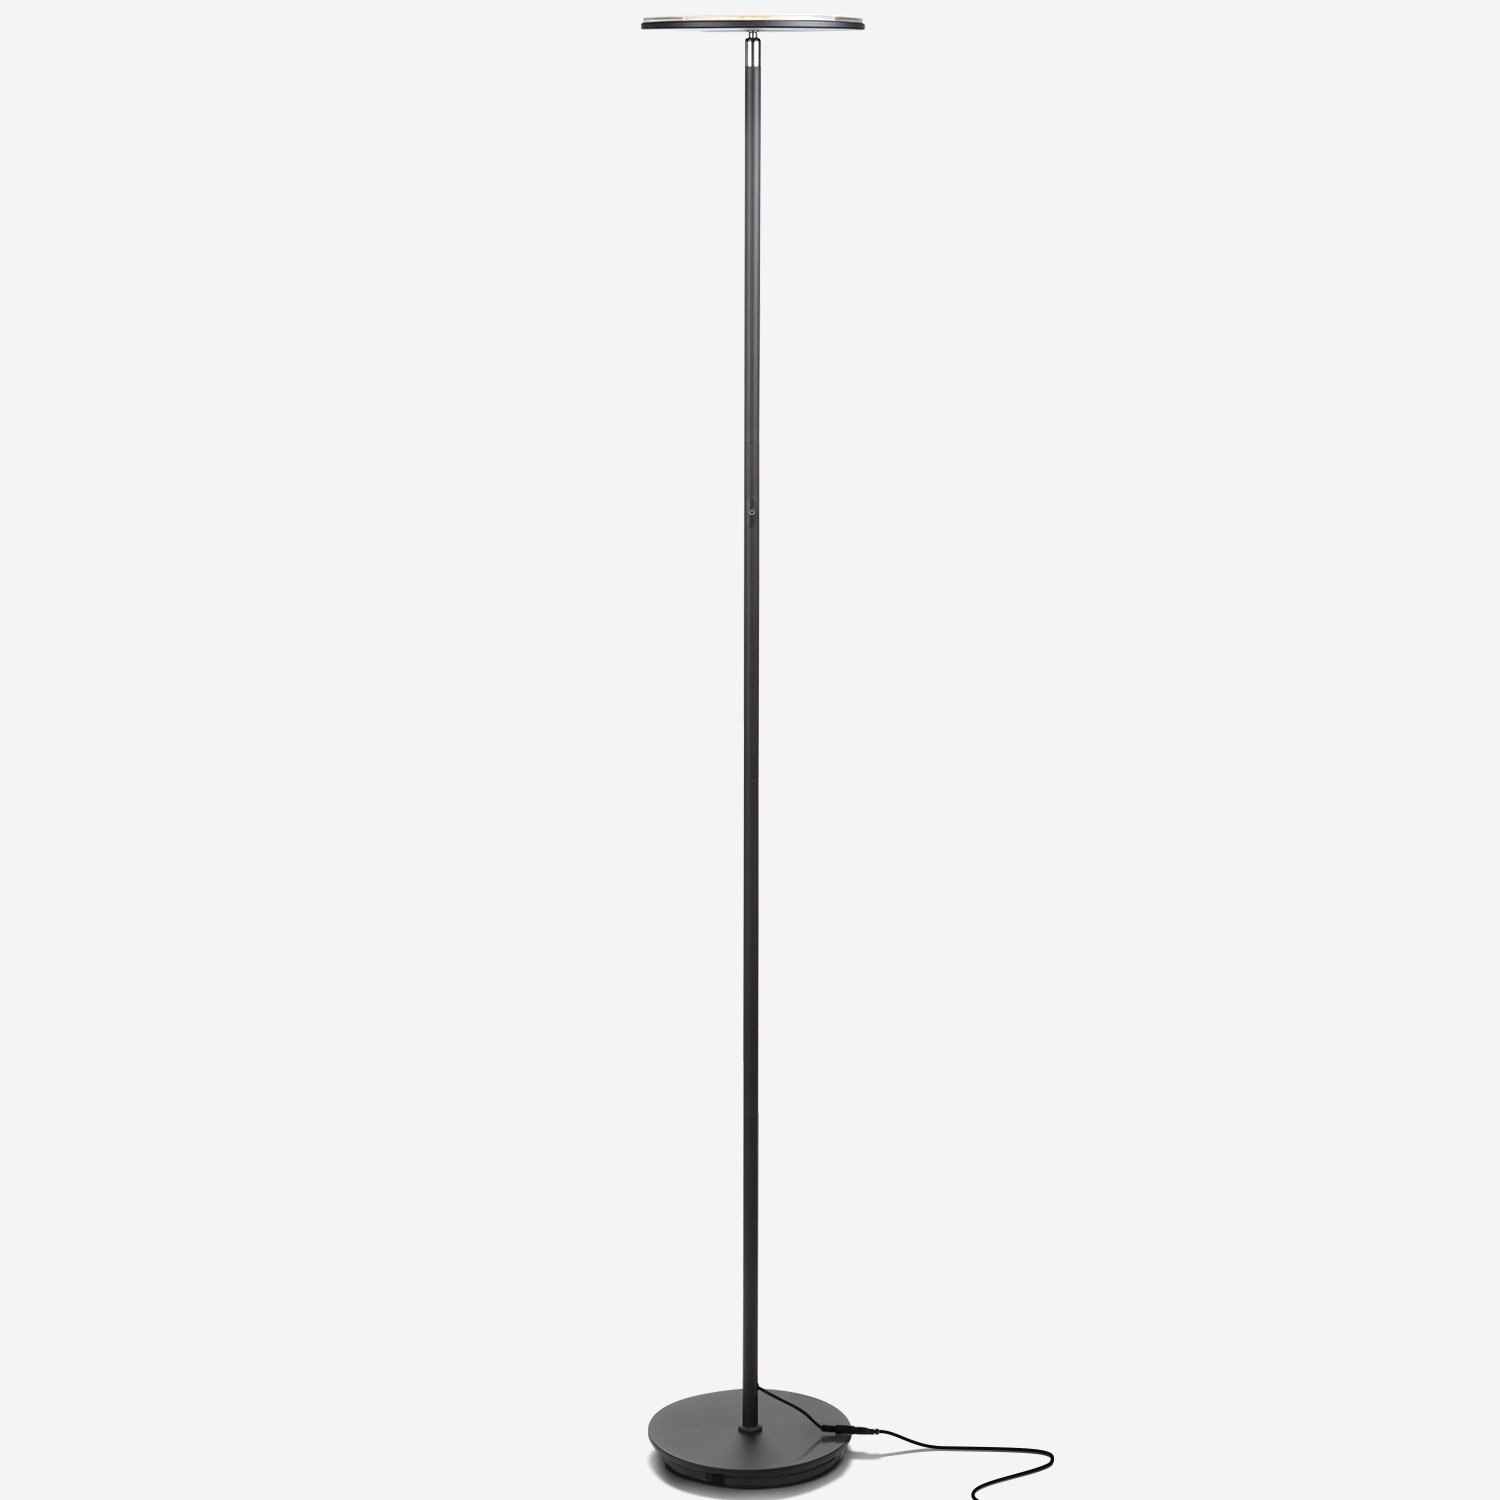 Sky Led Torchiere Super Bright Floor Lamp Living Room Office in dimensions 1500 X 1500